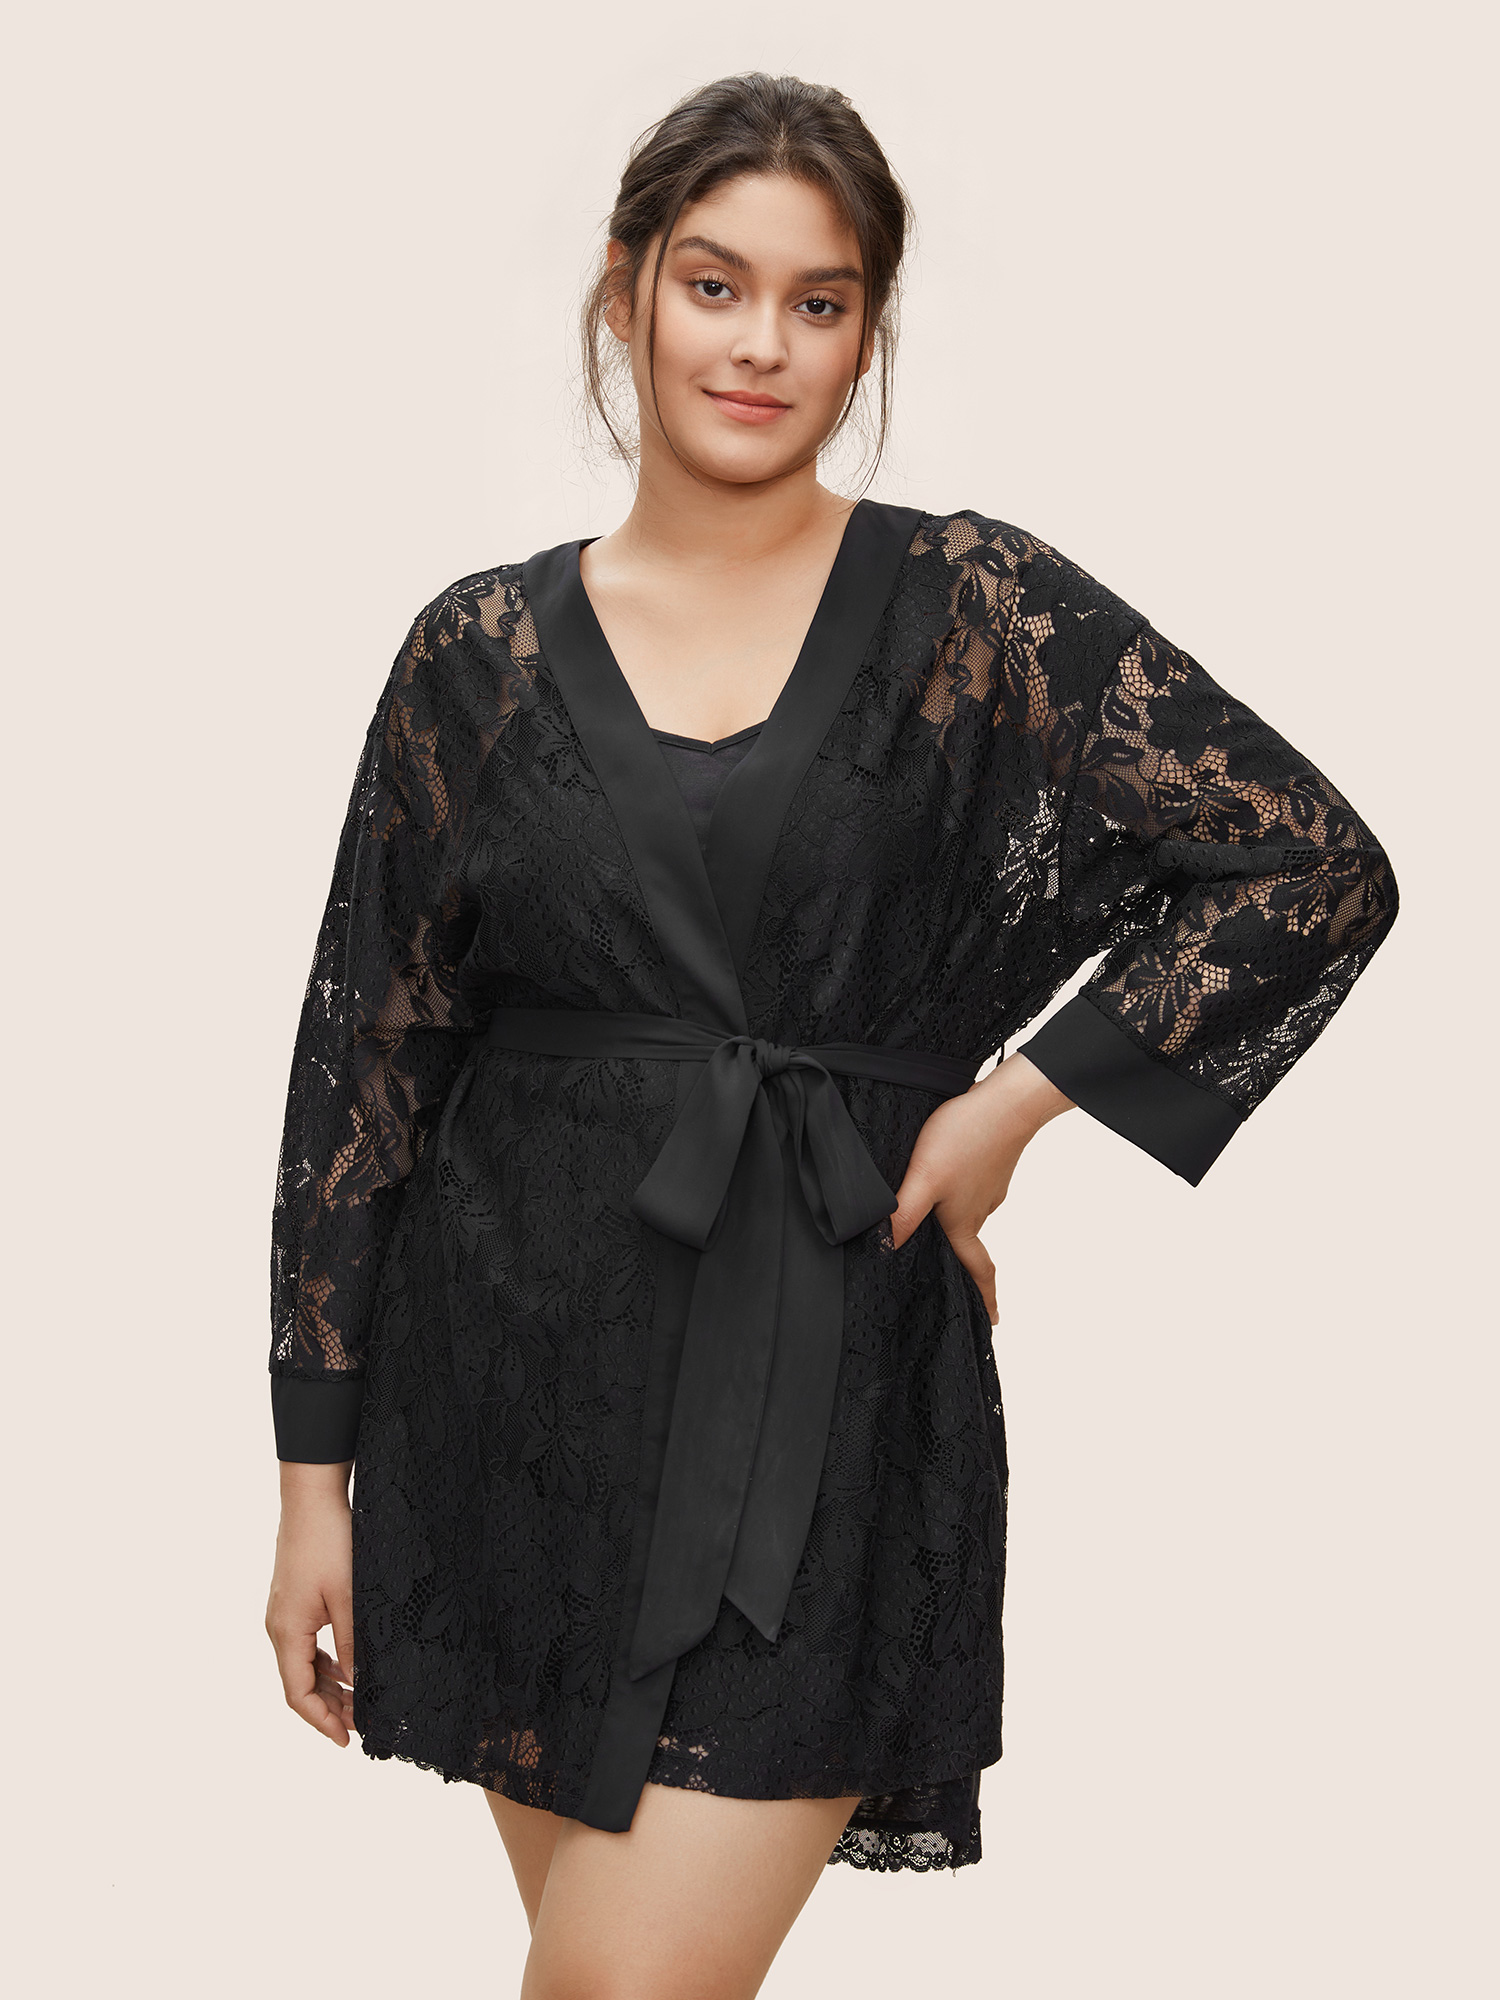 

Plus Size Silhouette Floral Print Lace Panel Belted Robe Black Silhouette Floral Print Non Everyday Lounge Robes/Robes Sets  Bloomchic